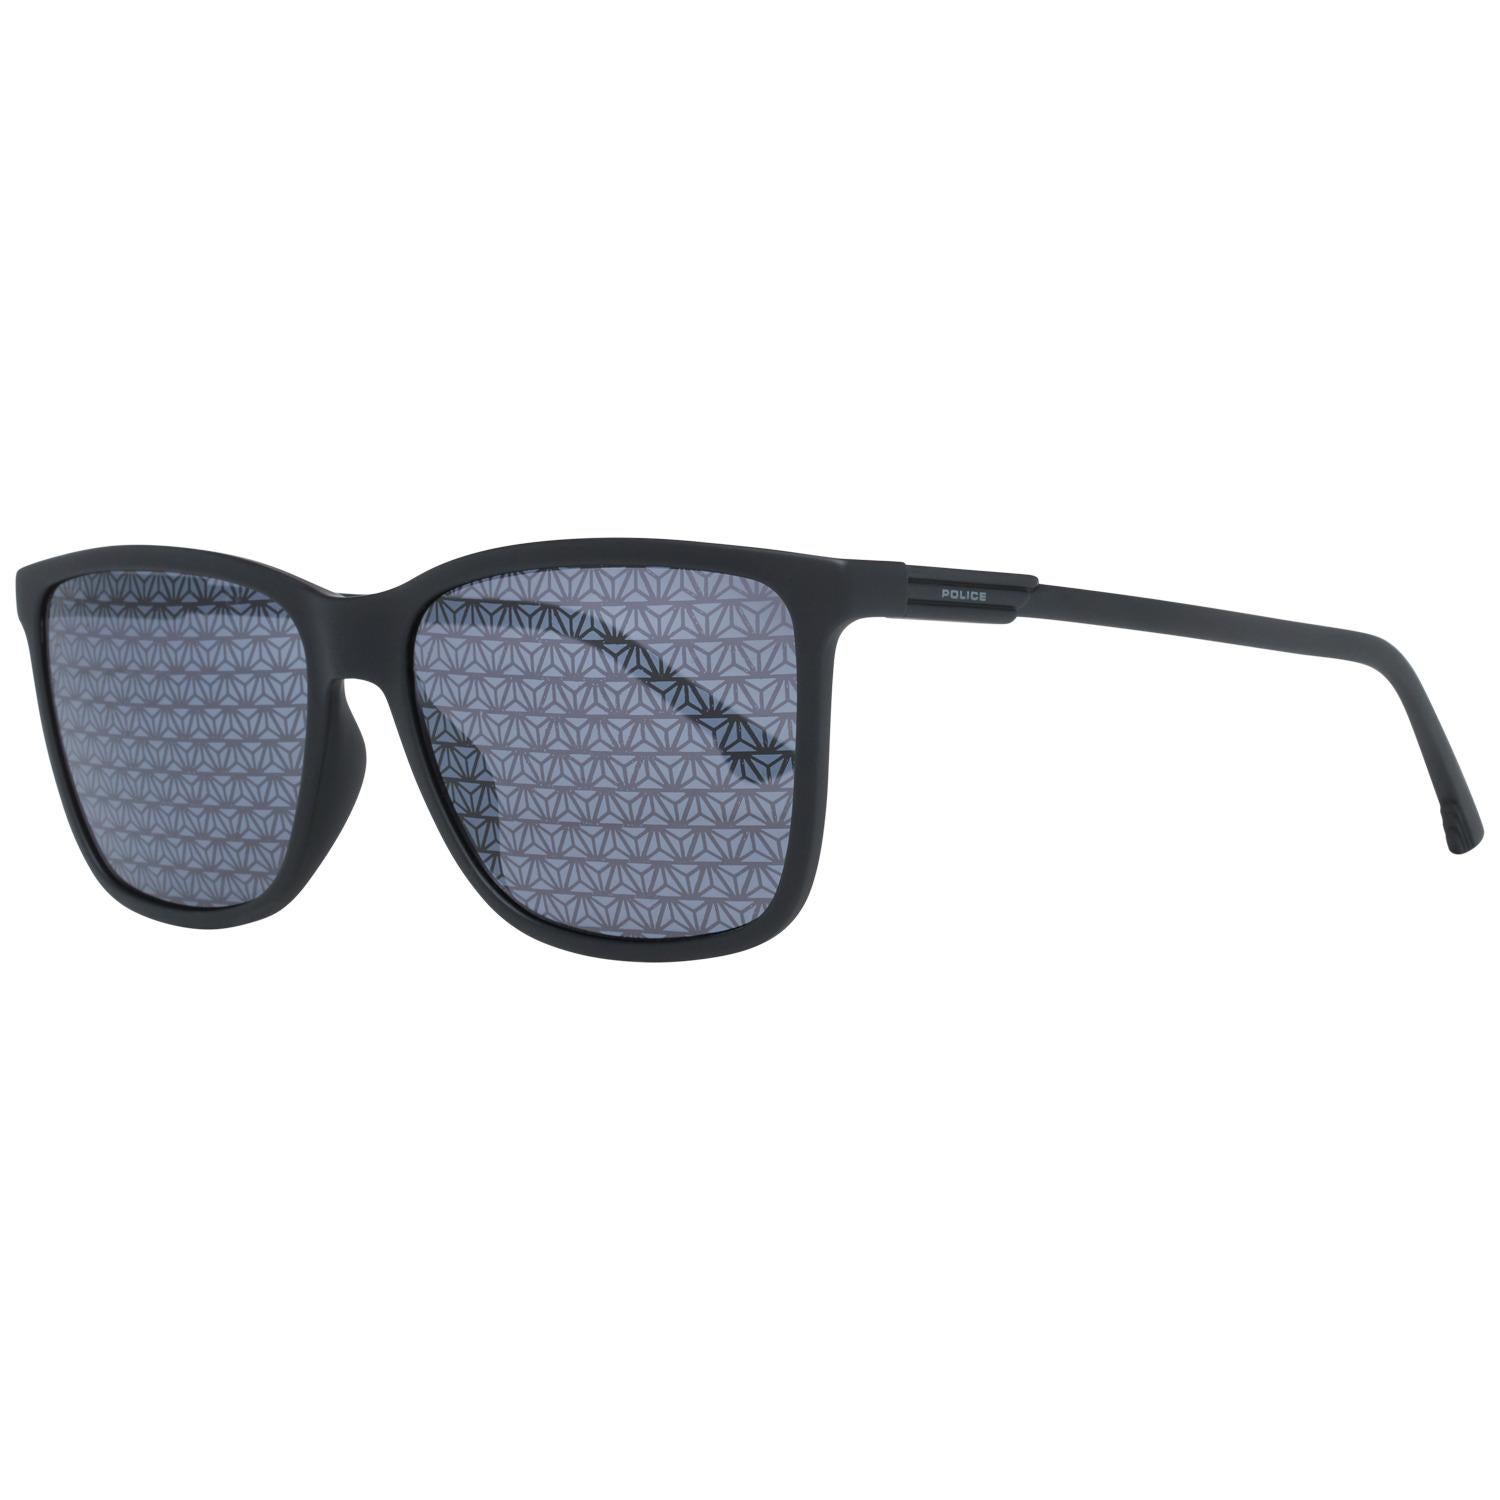 Details
MATERIAL: Acetate
COLOR: Black
MODEL: SPL585 576AAL
GENDER: Adult Unisex
COUNTRY OF MANUFACTURE: China
TYPE: Sunglasses
ORIGINAL CASE?: Yes
STYLE: Rectangle
OCCASION: Casual
FEATURES: Lightweight
LENS COLOR: Silver
LENS TECHNOLOGY: